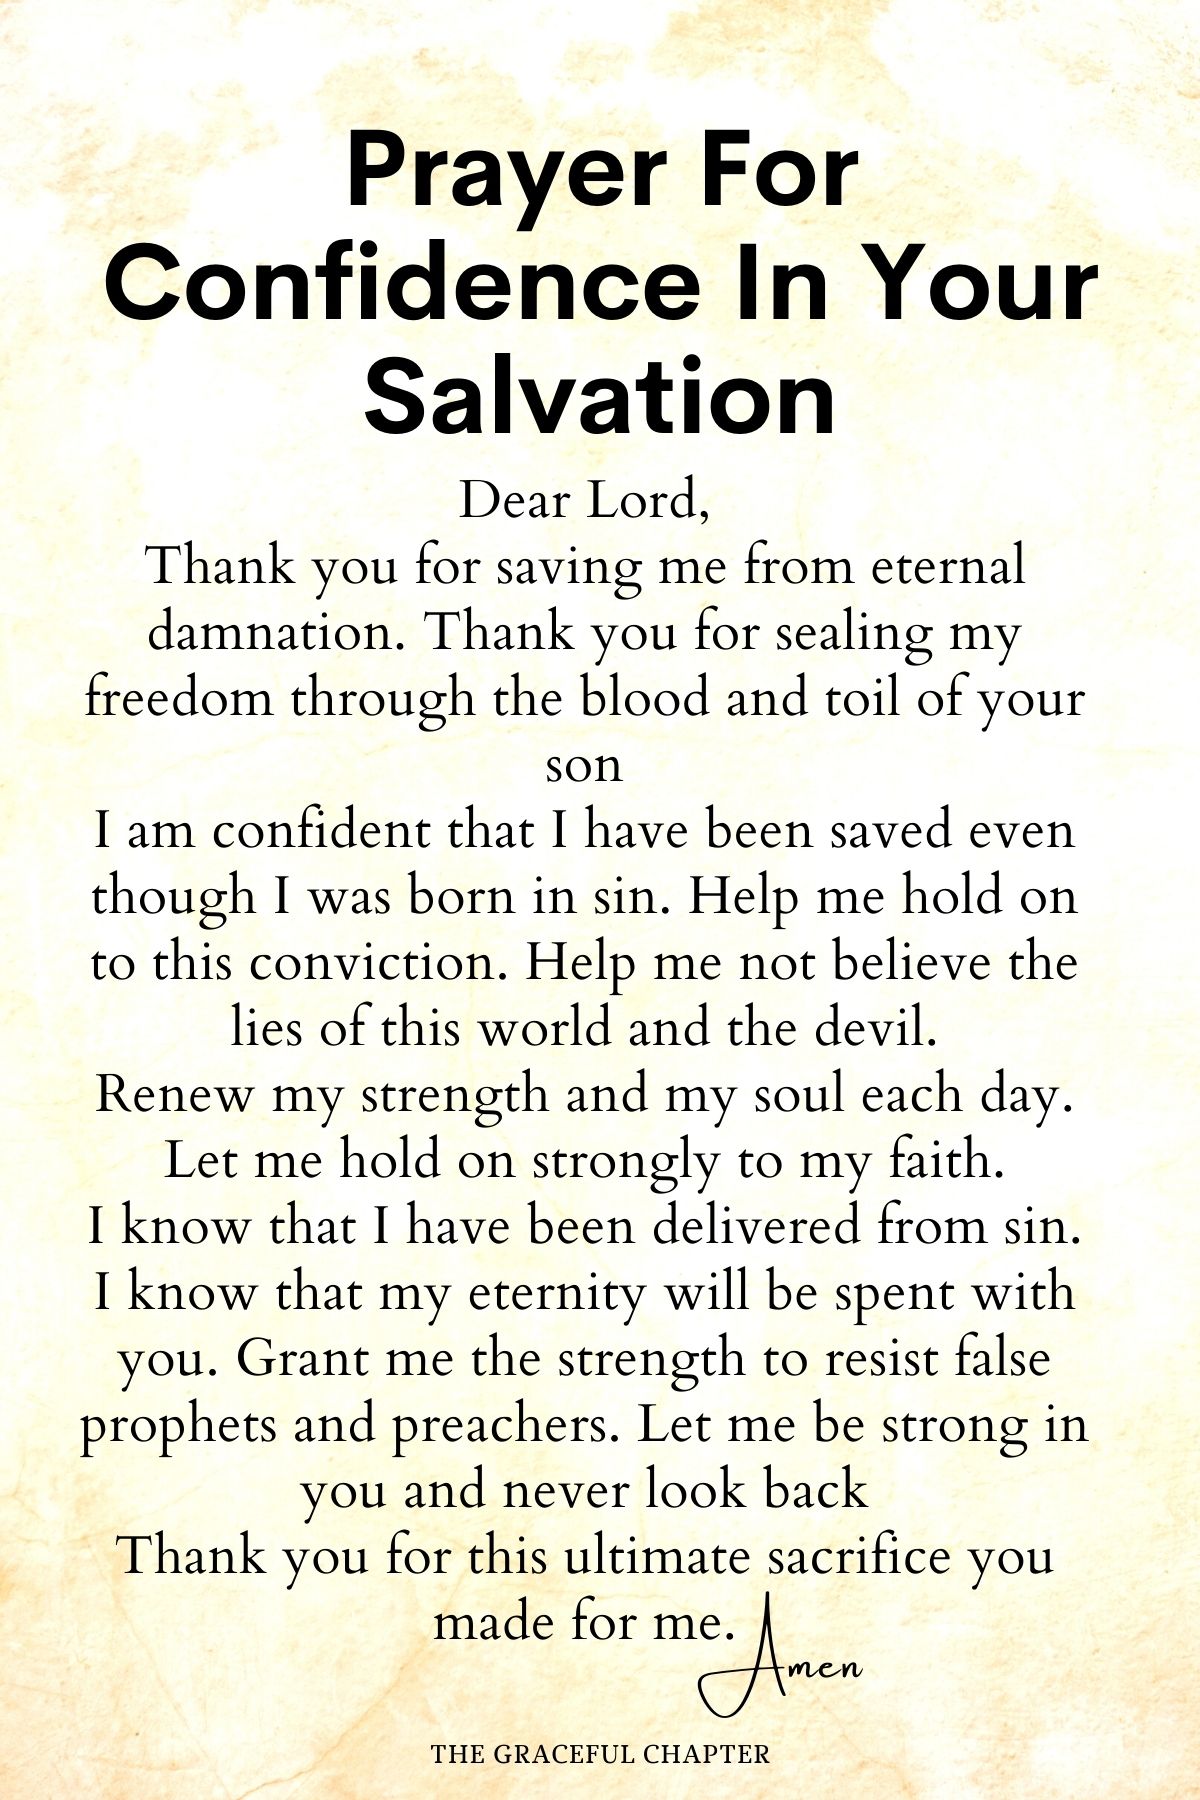 Prayer for confidence in your salvation